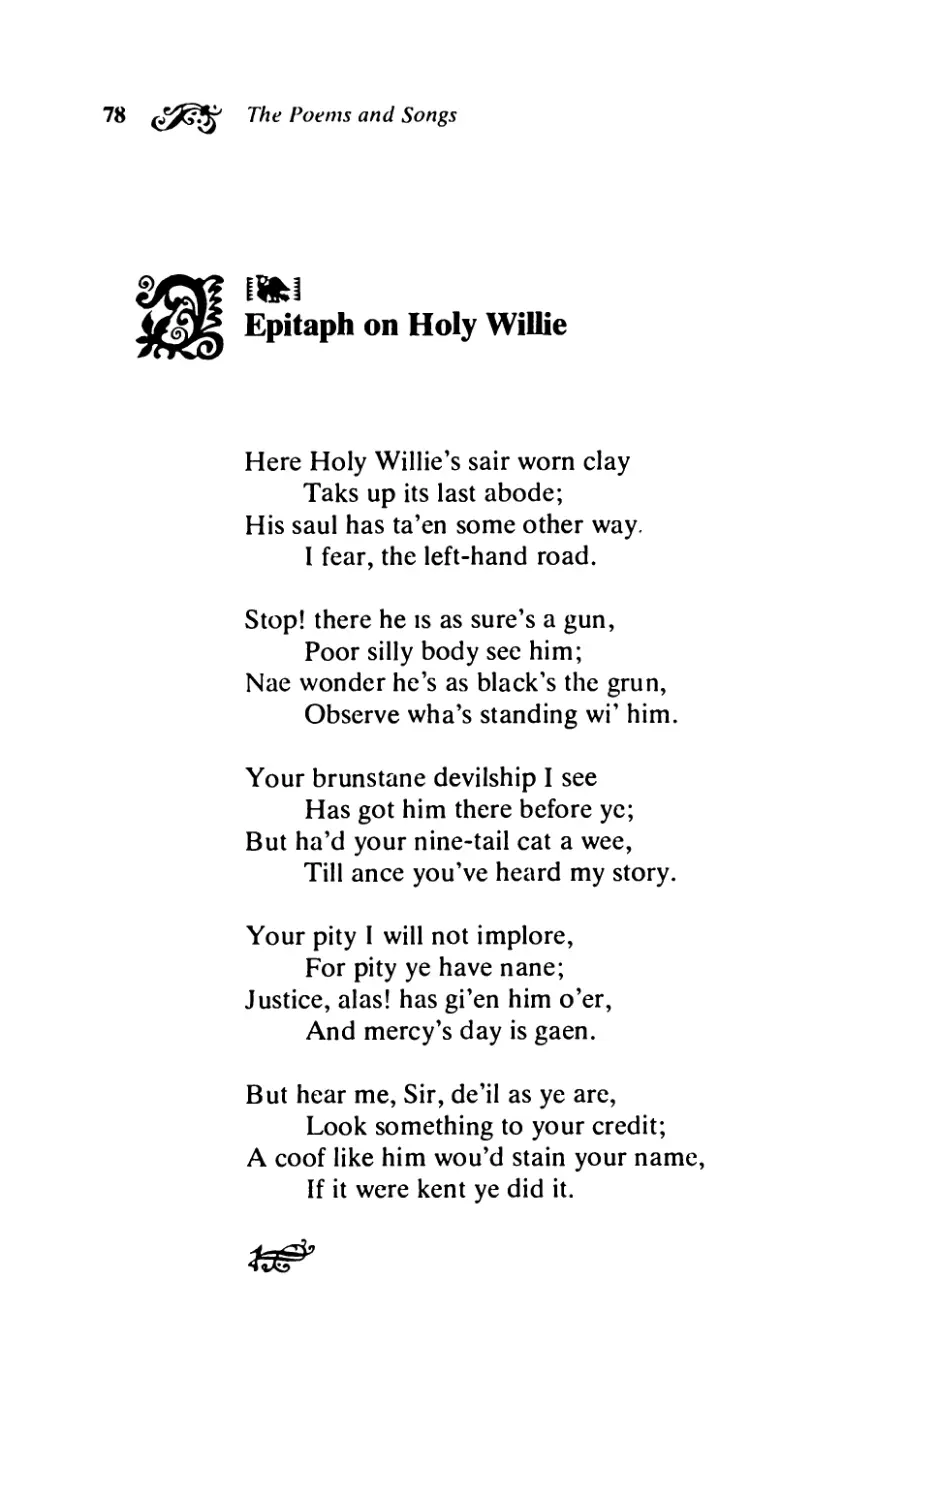 Epitaph on Holy Willie